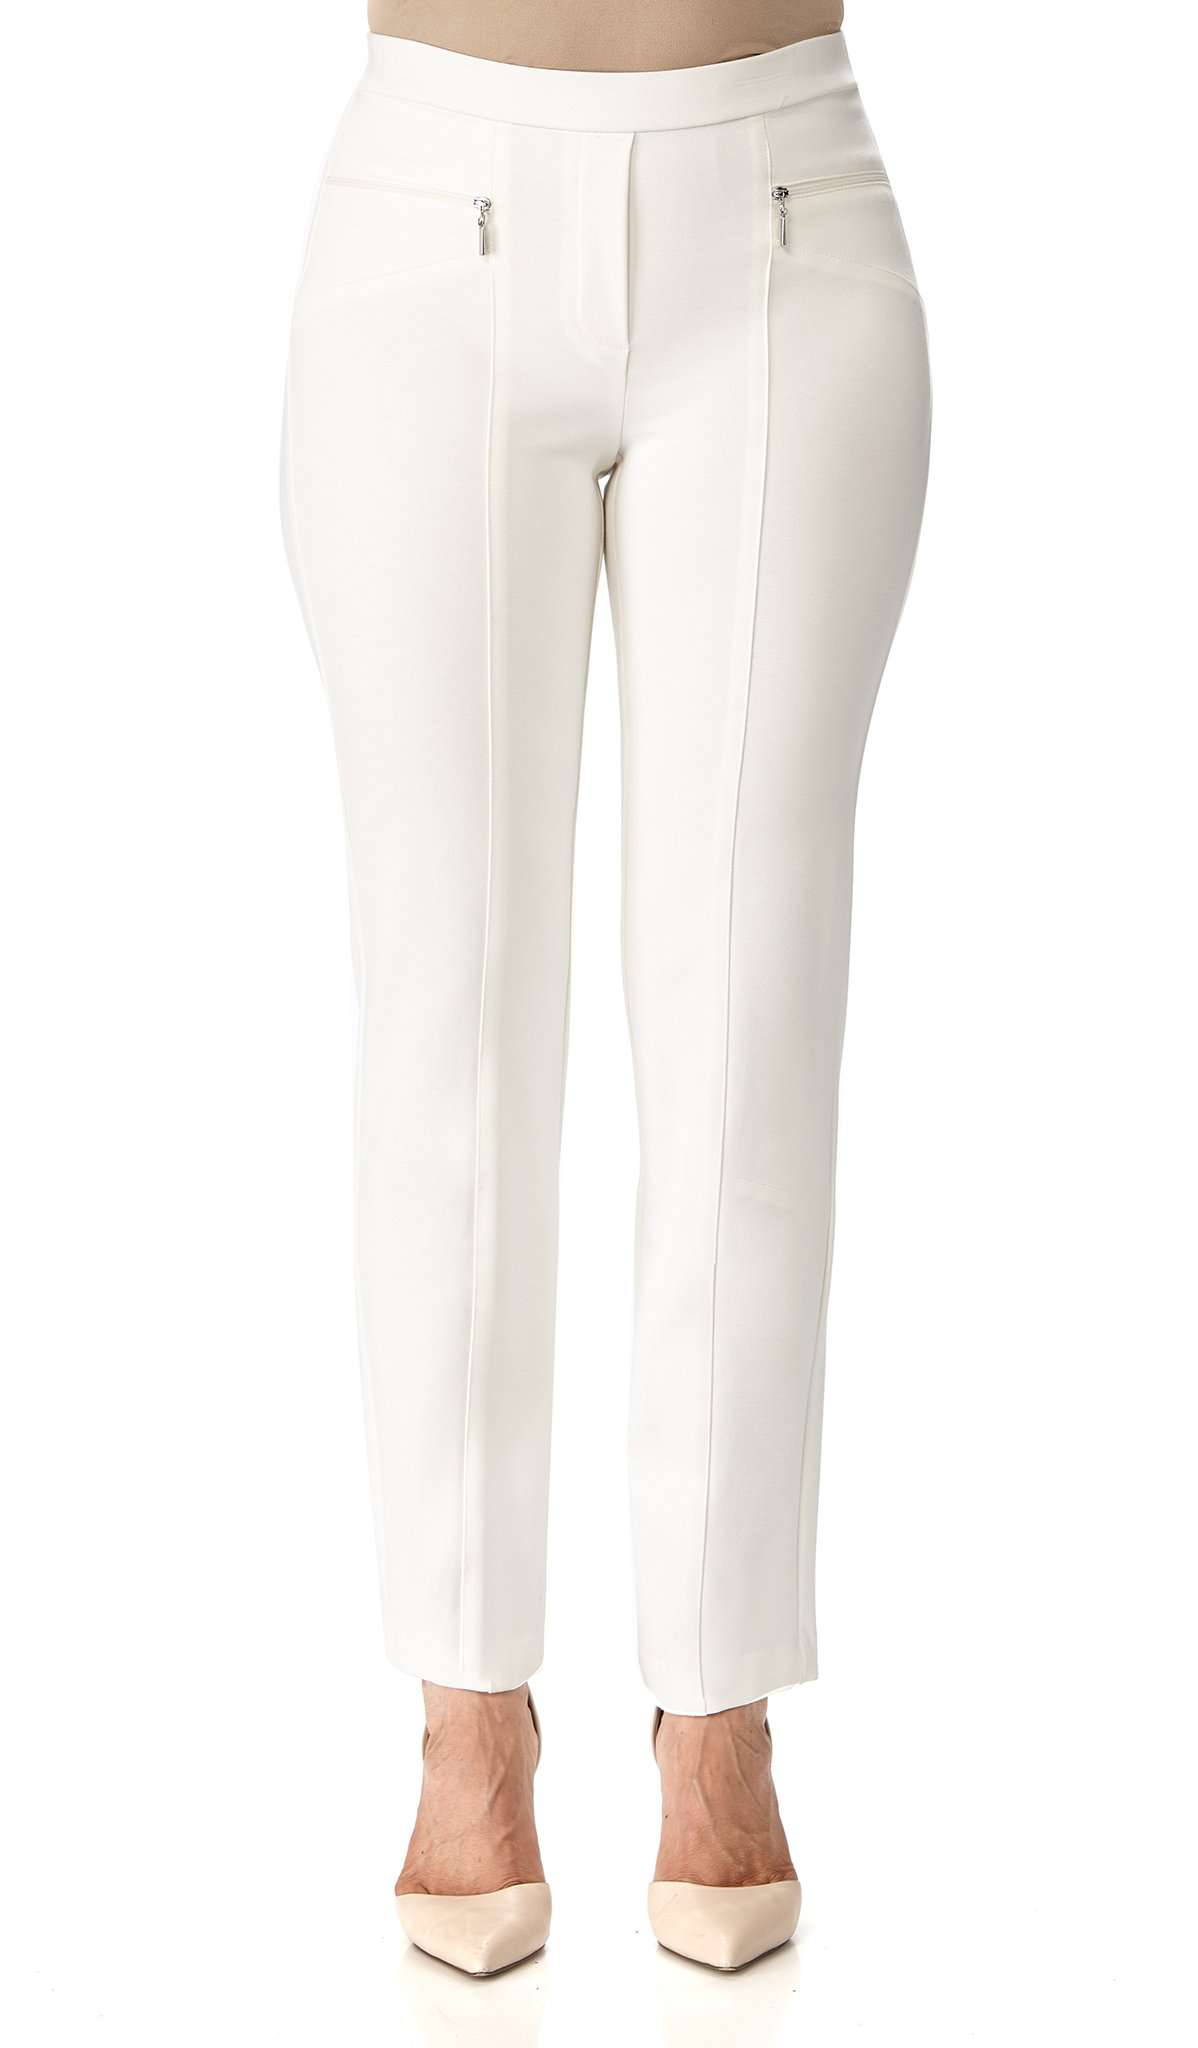 Women's Pant's Off White Stretch Quality Ivory Pants Pull on Easy Amazing  Flattering Fit Yvonne Marie Designs Made In Canada On Sale Now 50 Off Pants